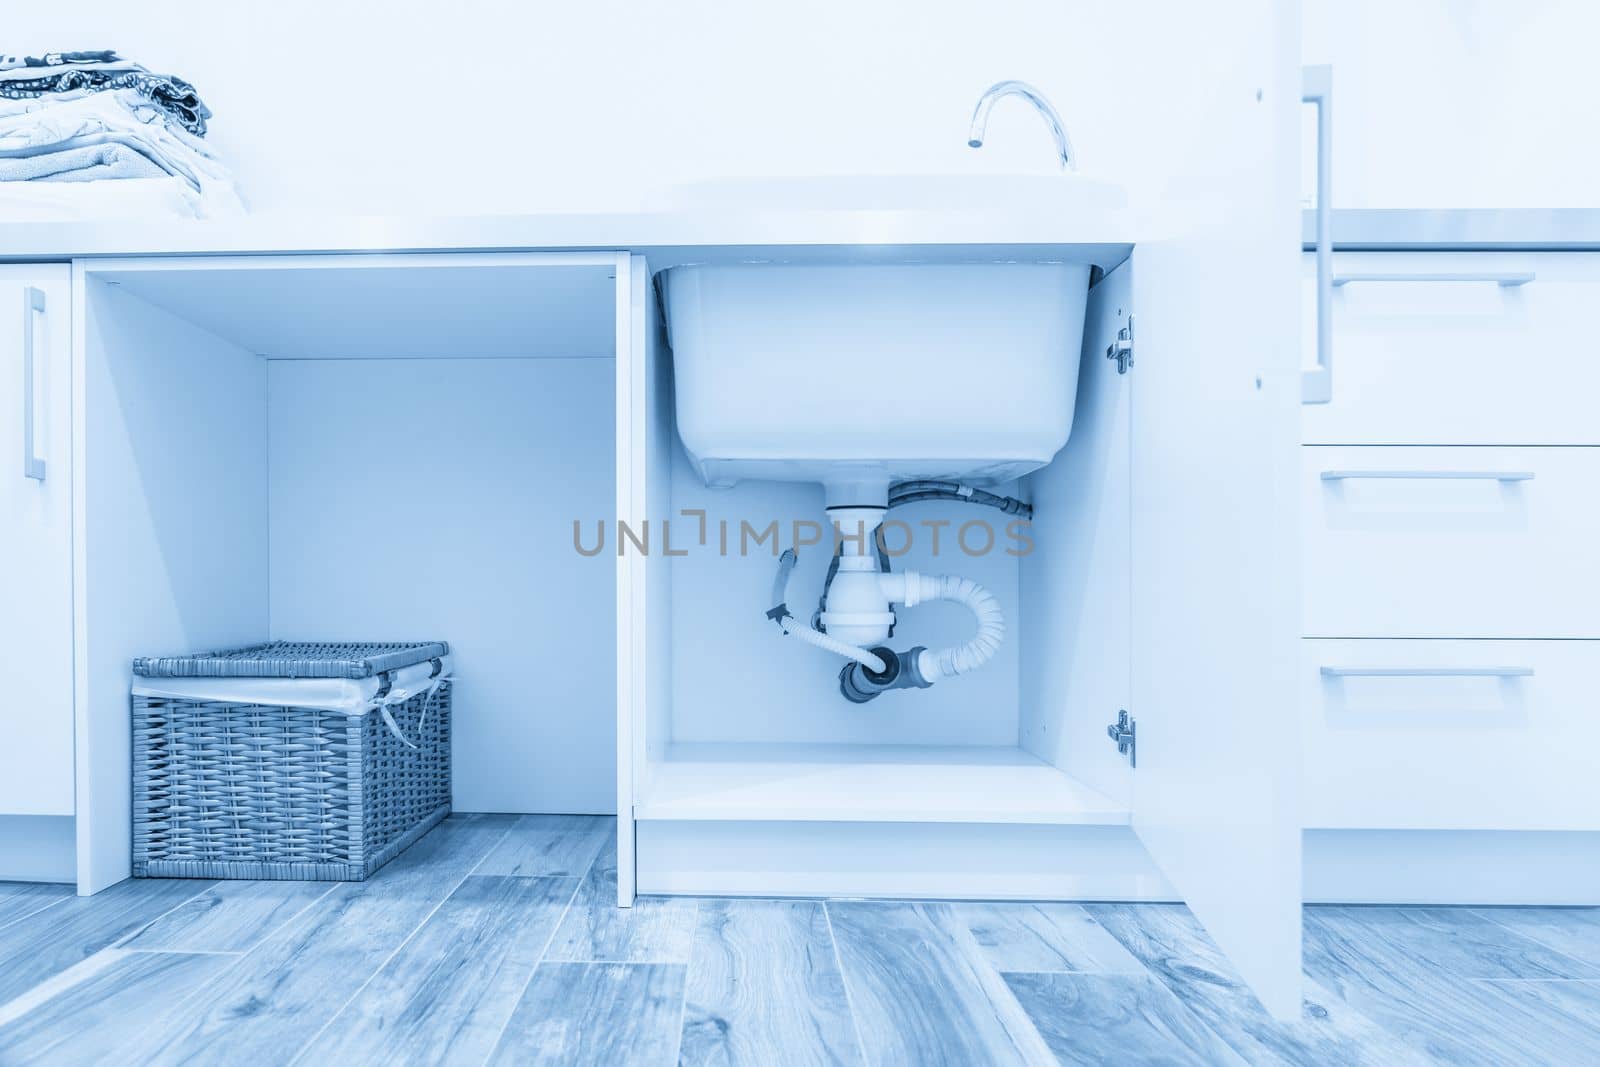 Under the sink view in laundry room by Mariakray